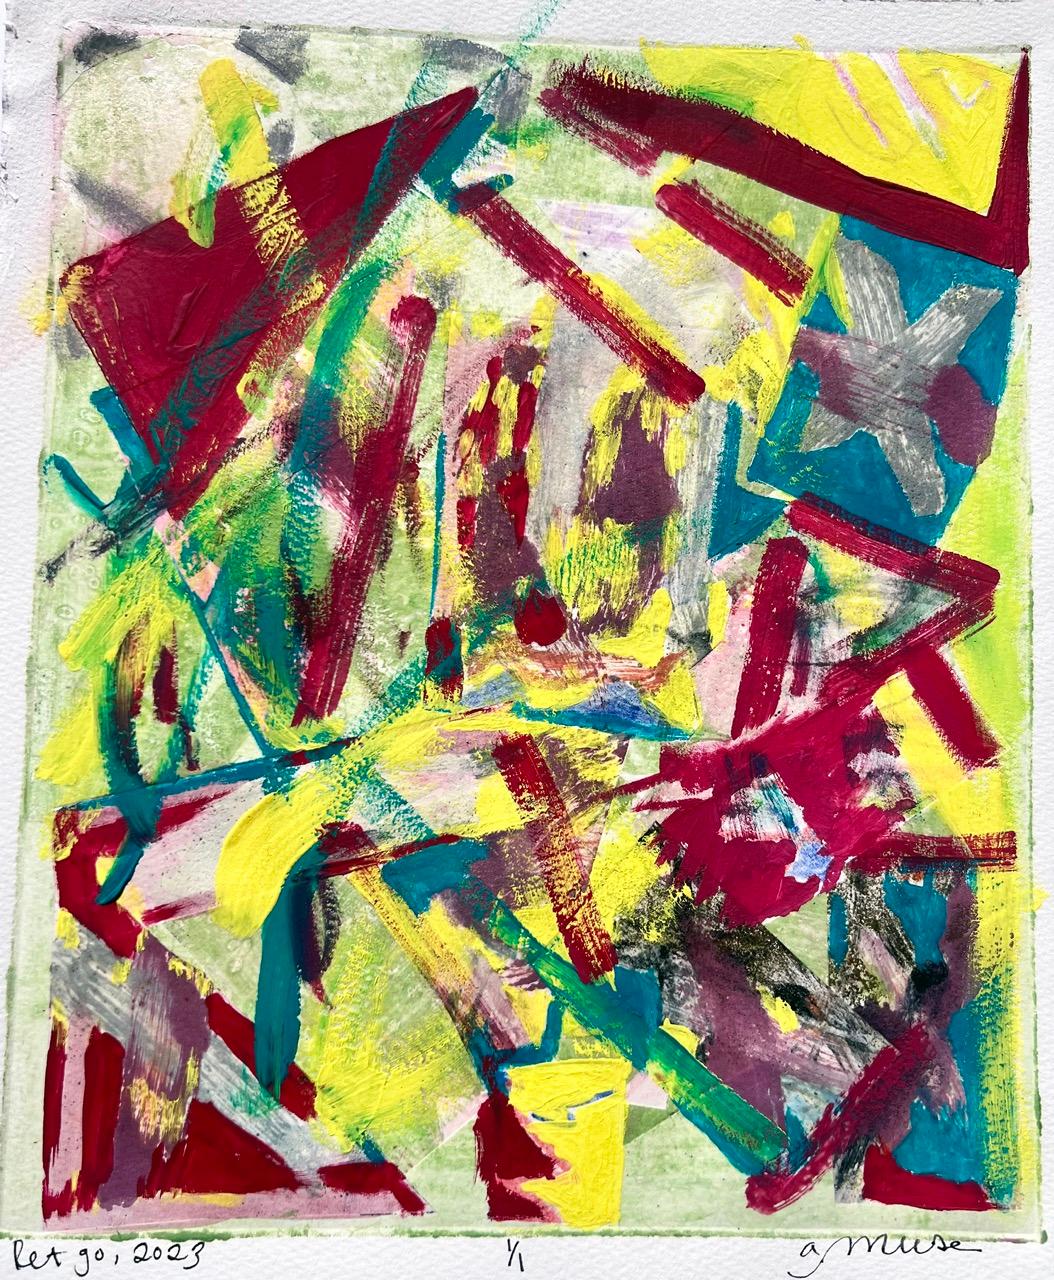 a.muse Abstract Print - Let Go, Abstract Art on Watercolor Paper, Emerging Art